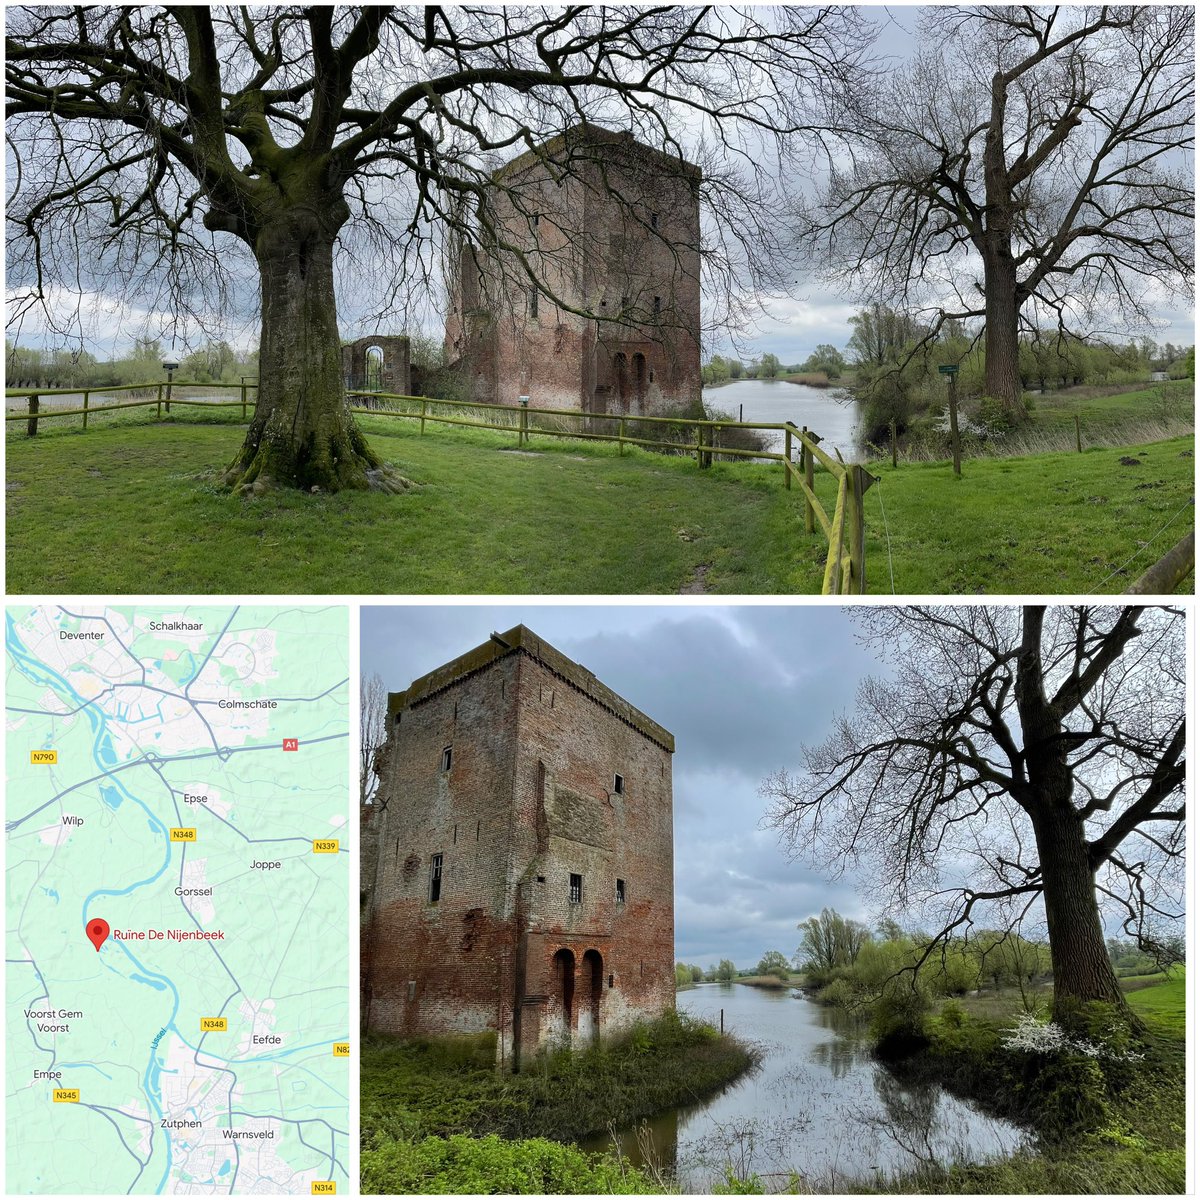 Inspiration for a new painting. Ruin castle Nijenbeek (destroyed in the Second World War) #panorama #photo #ruin #castle #IJssel #mywalktoday